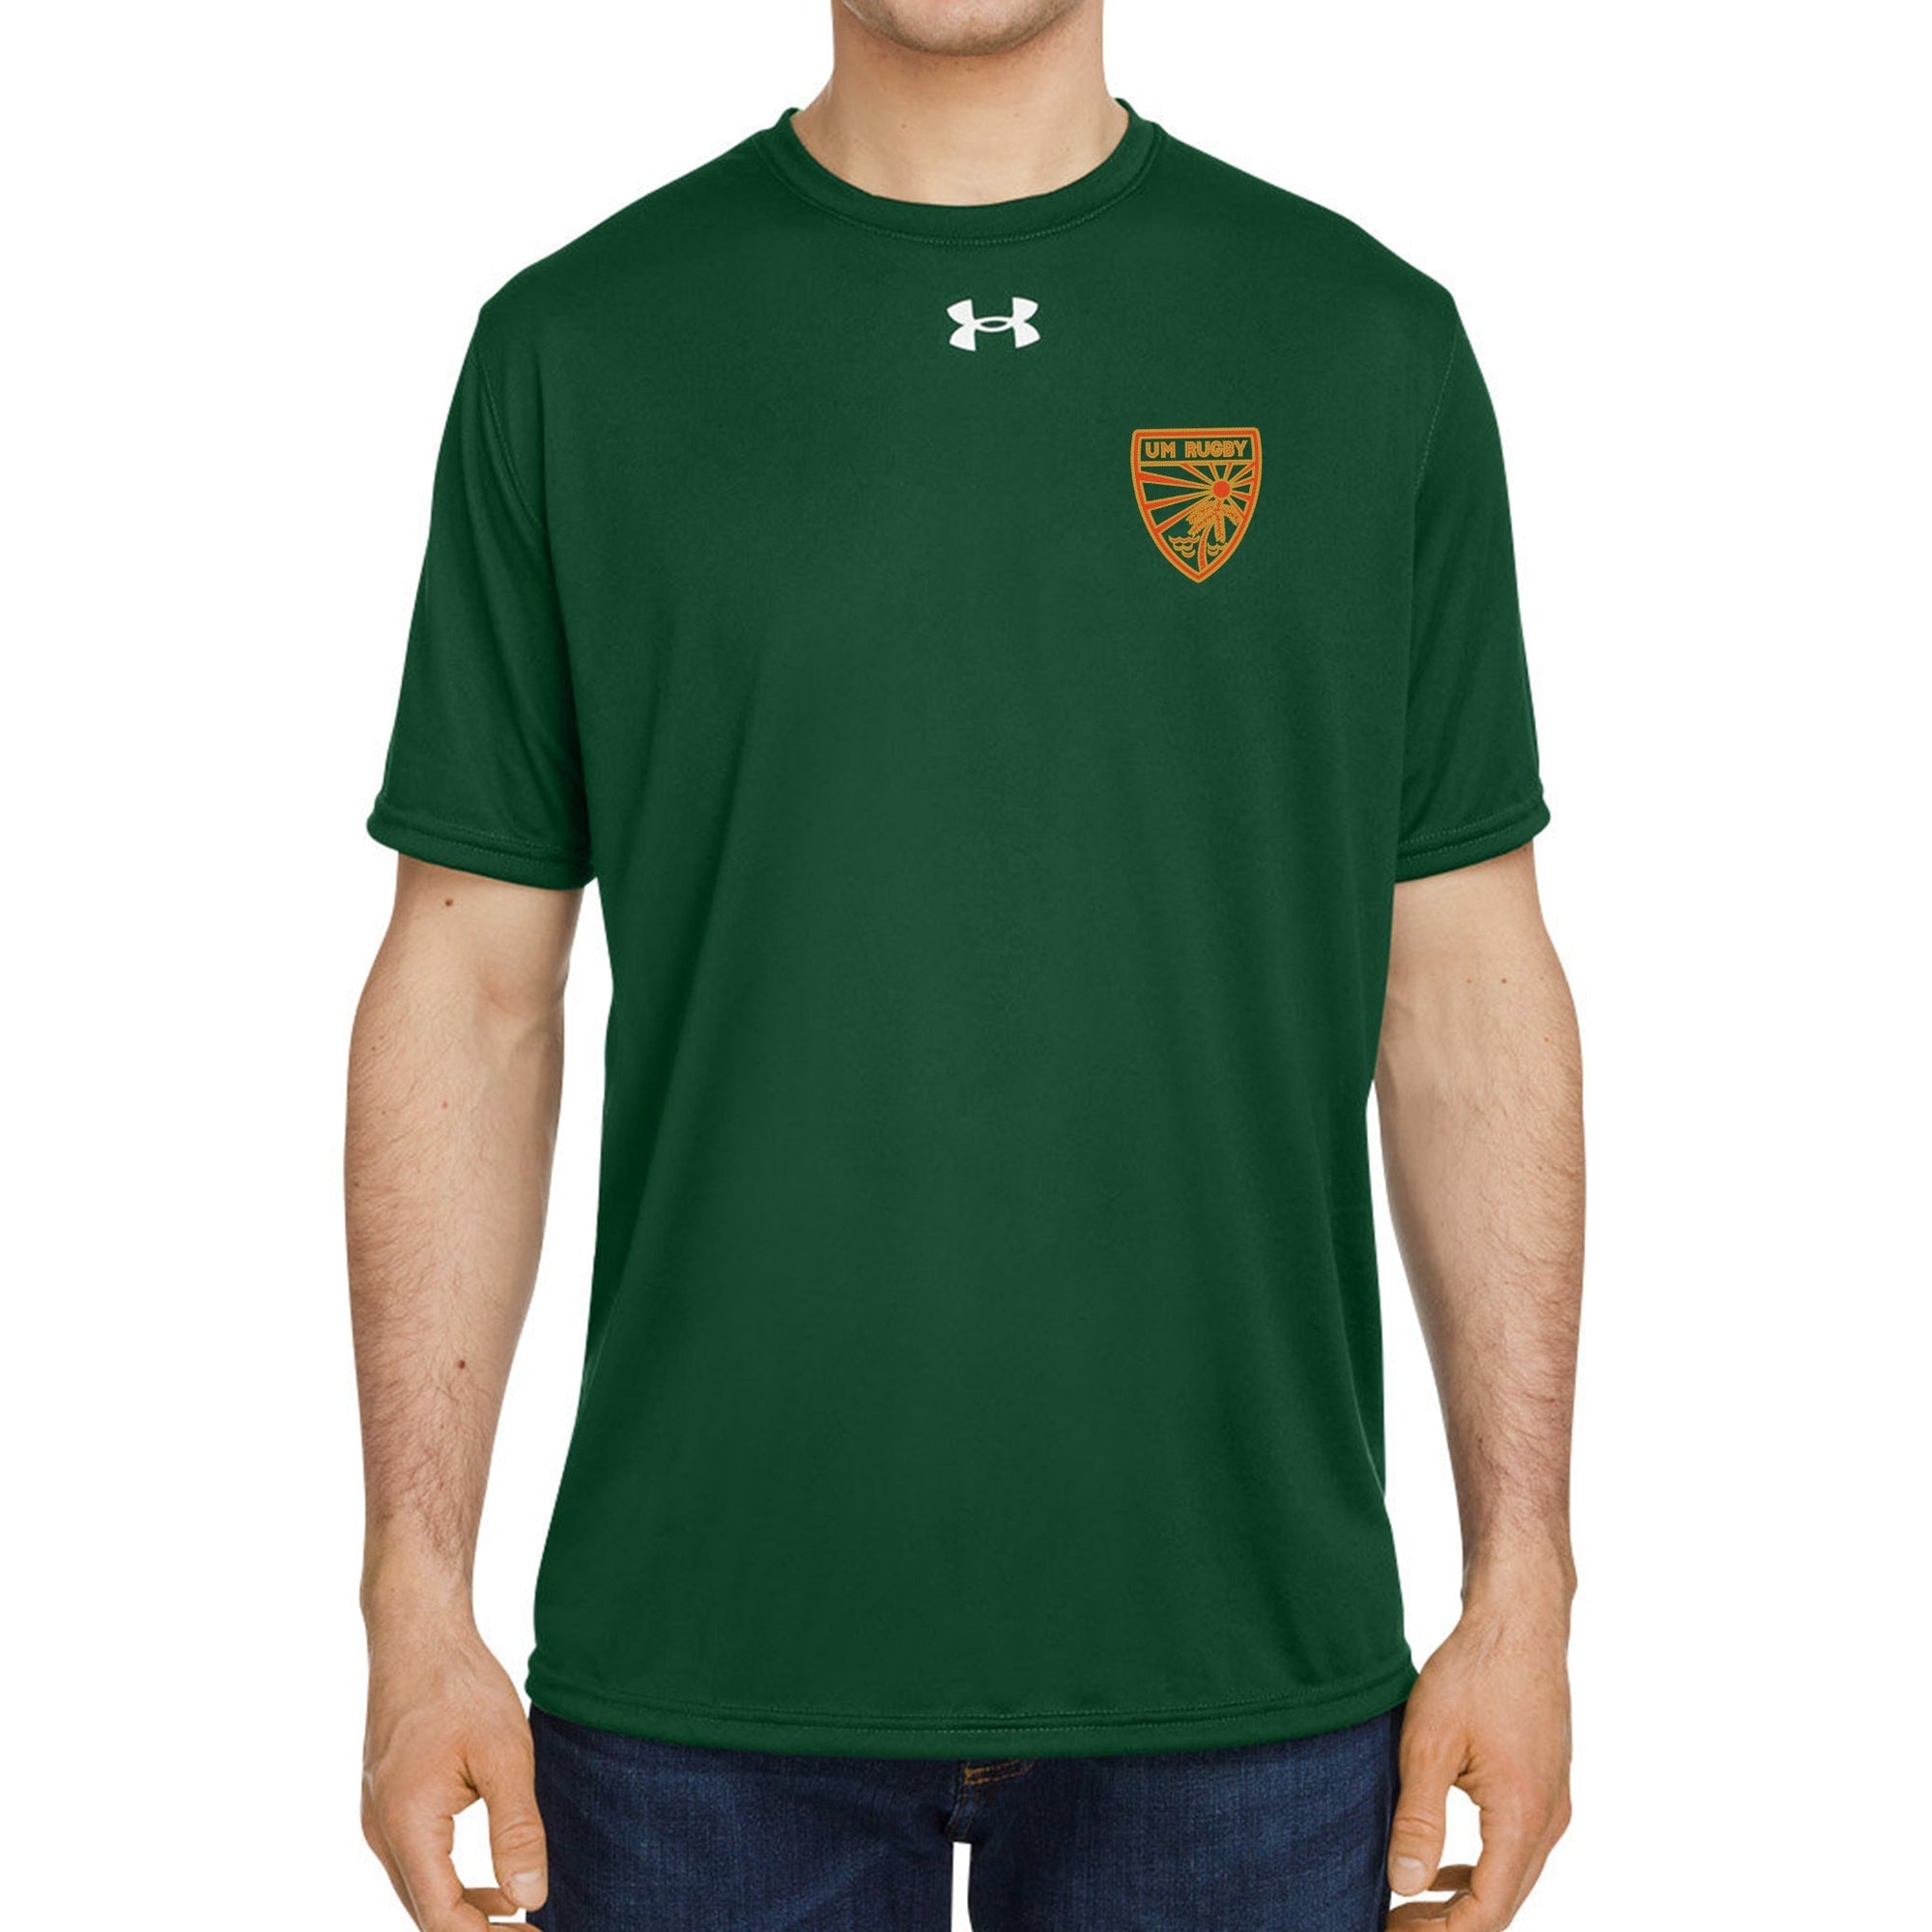 Rugby Imports UMiami Rugby UA Team Tech T-Shirt